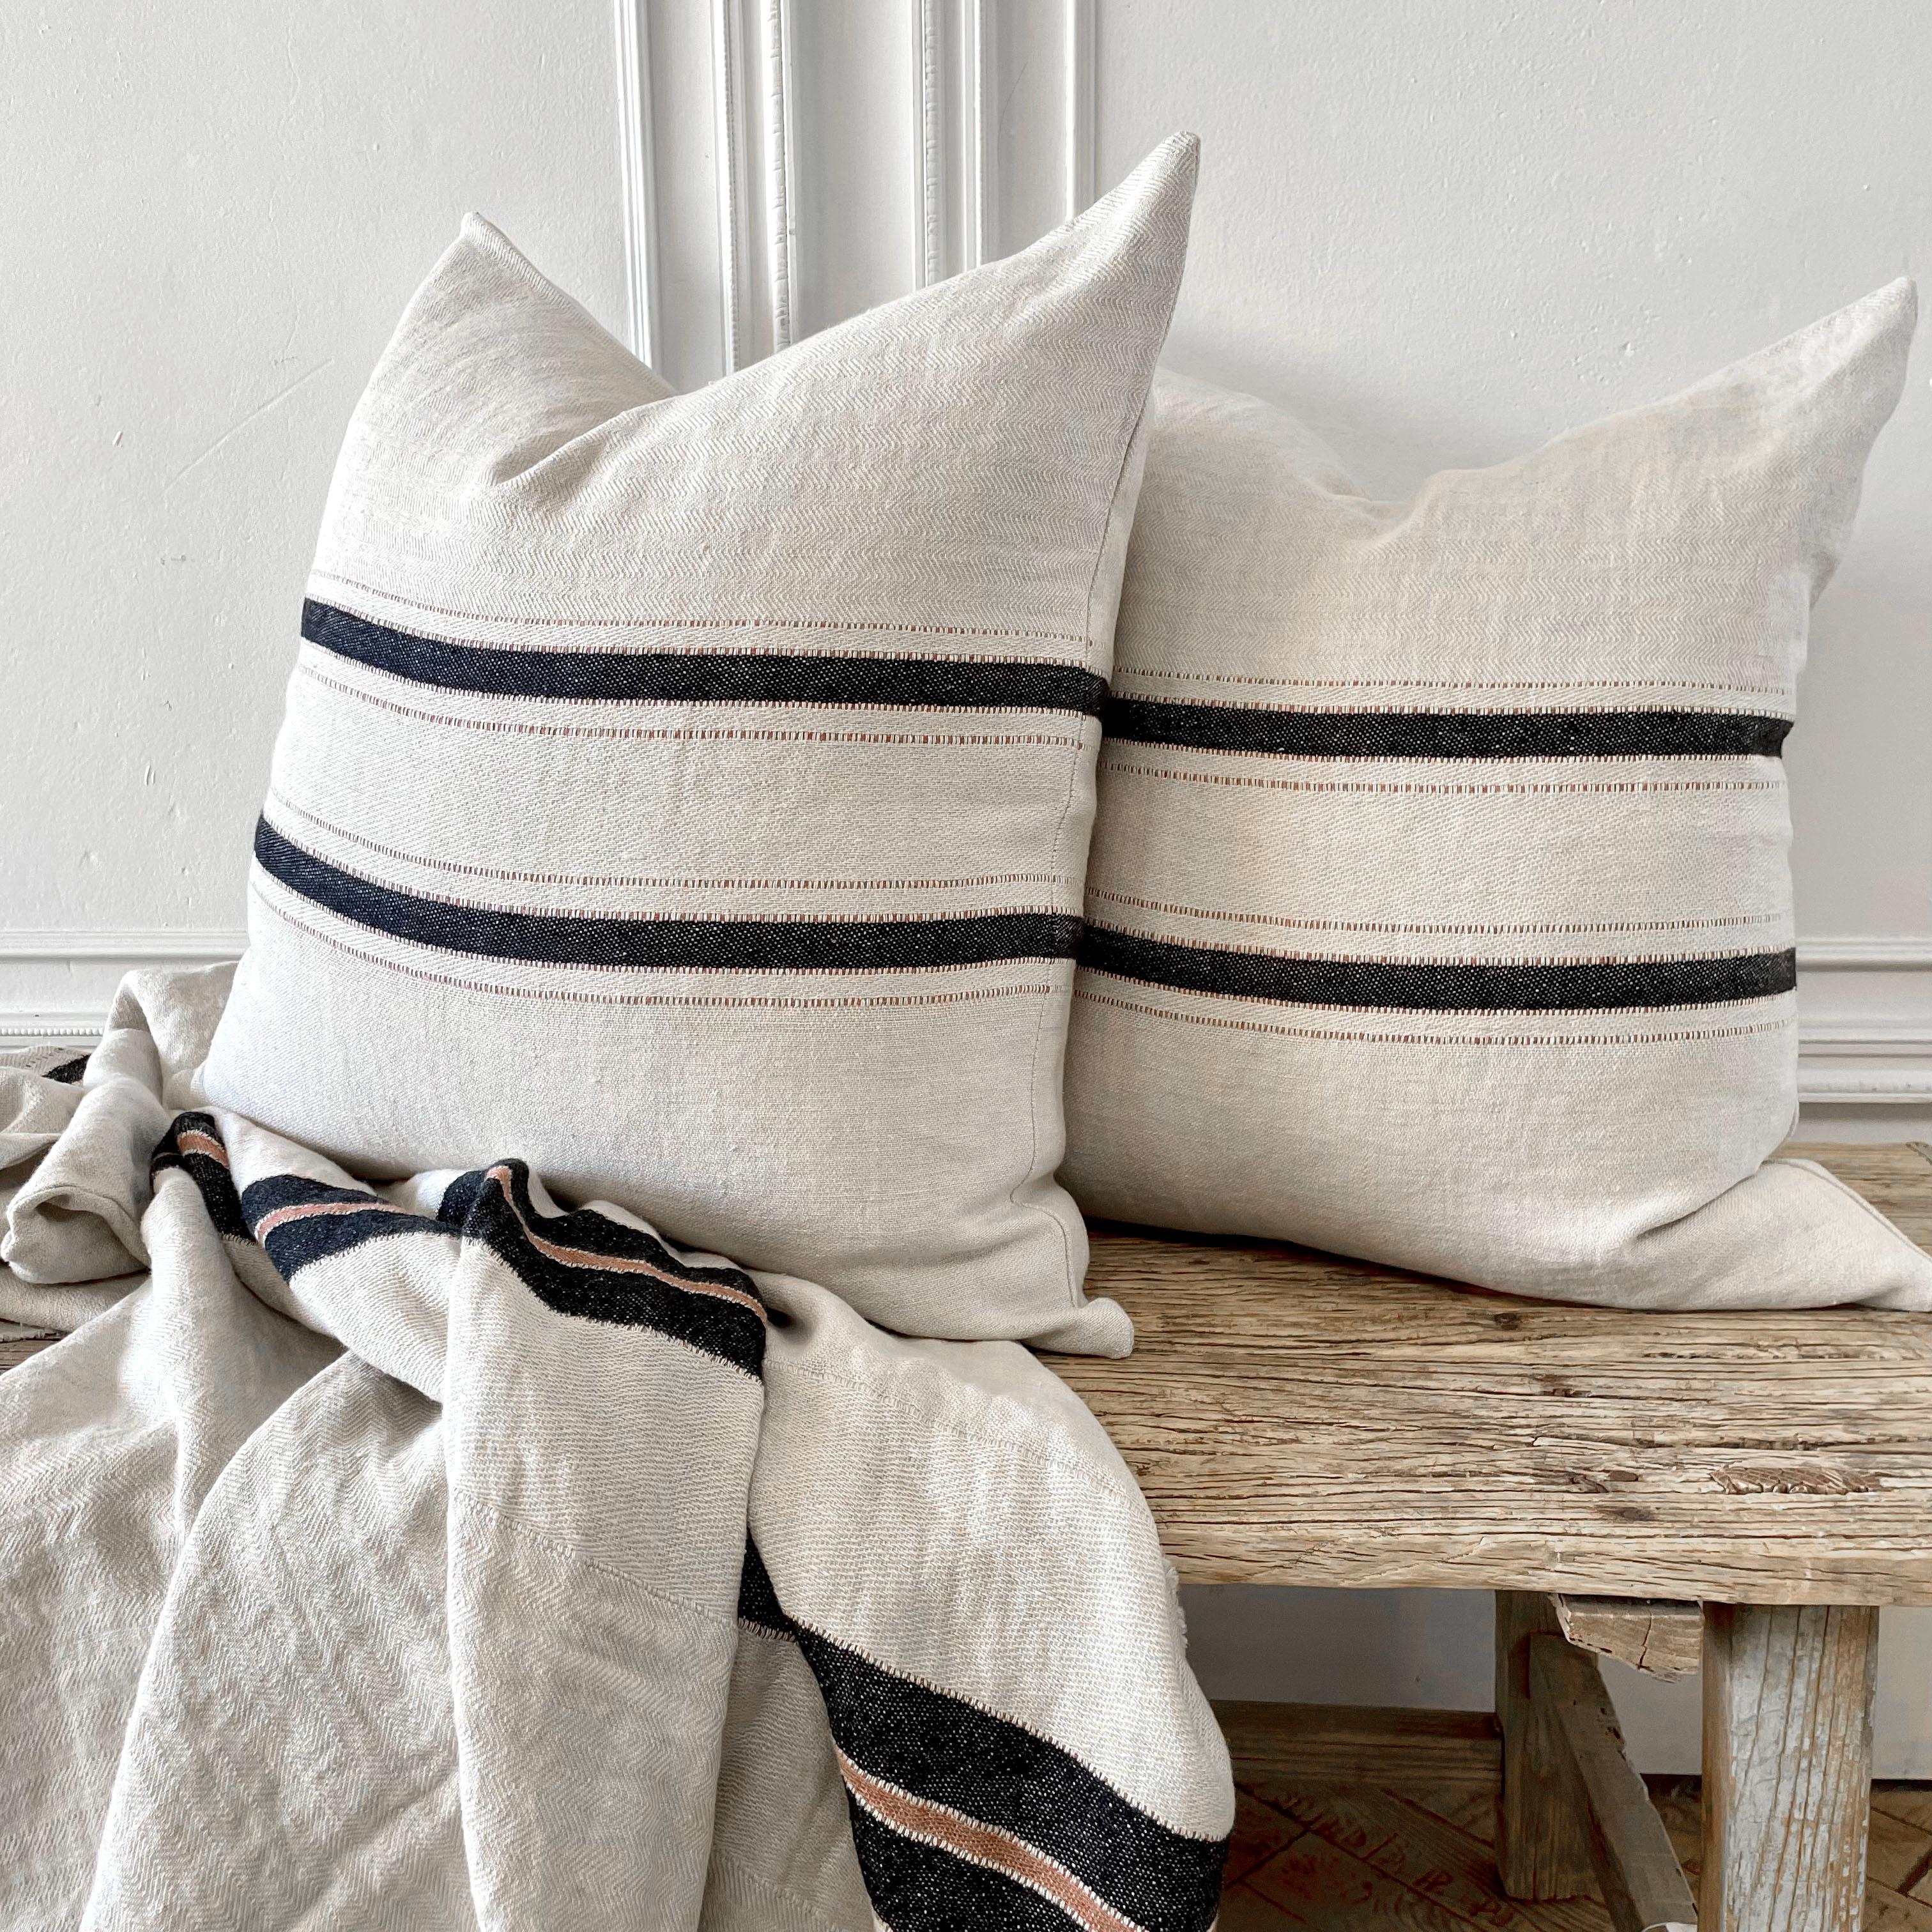 This pillow cover is inspired by The Belgian Towel. The design is simple, with black and old rose stripes sitting on an ecru ground. Includes down insert. Our pillows are constructed with vintage one of a kind textiles from around the globe.